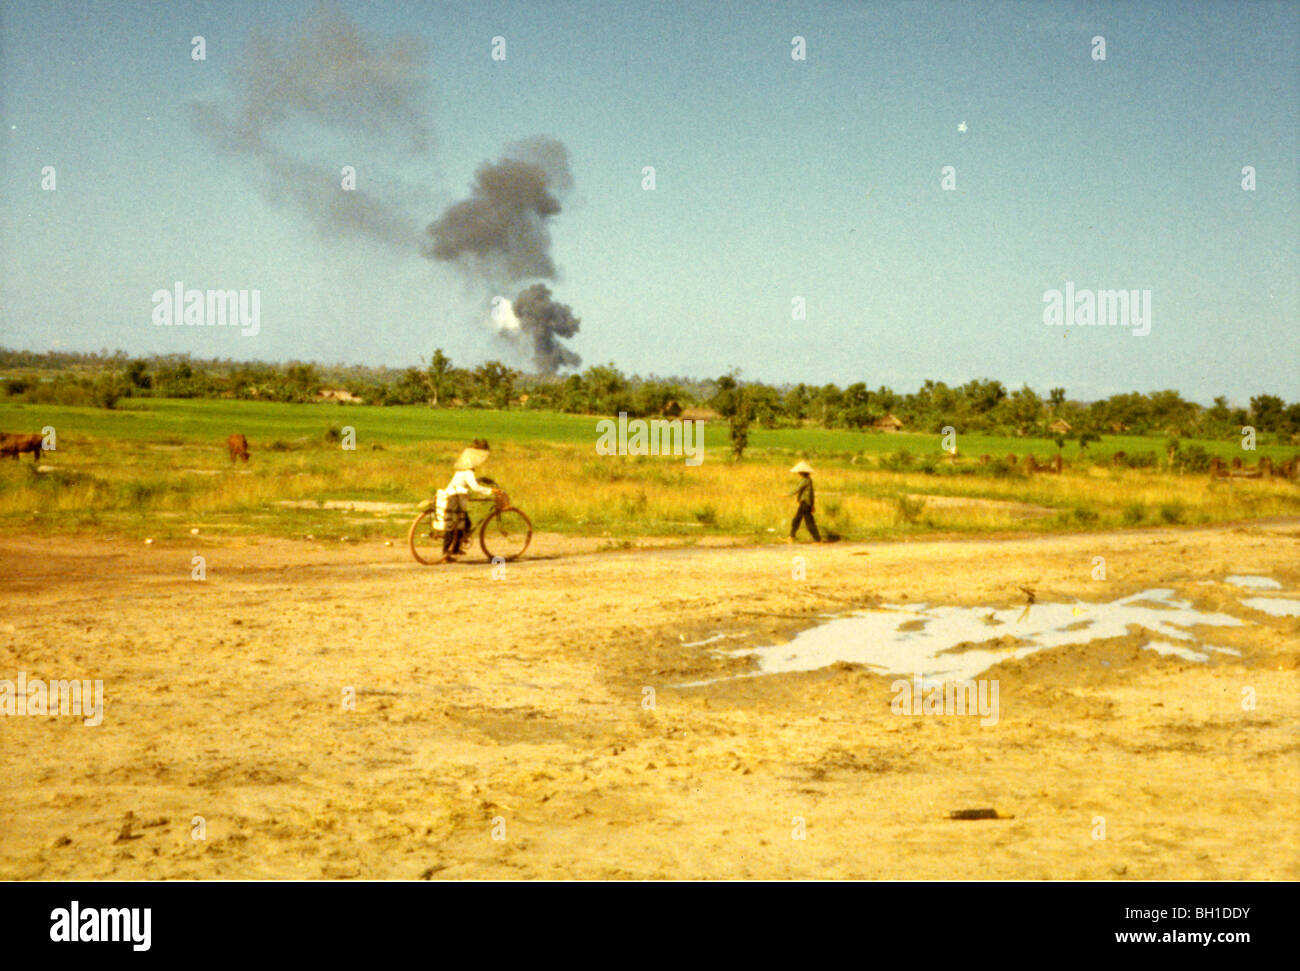 Villagers watch a smoke plume rise from a battle. 1st Infantry Division operate during Vietnam War. Stock Photo